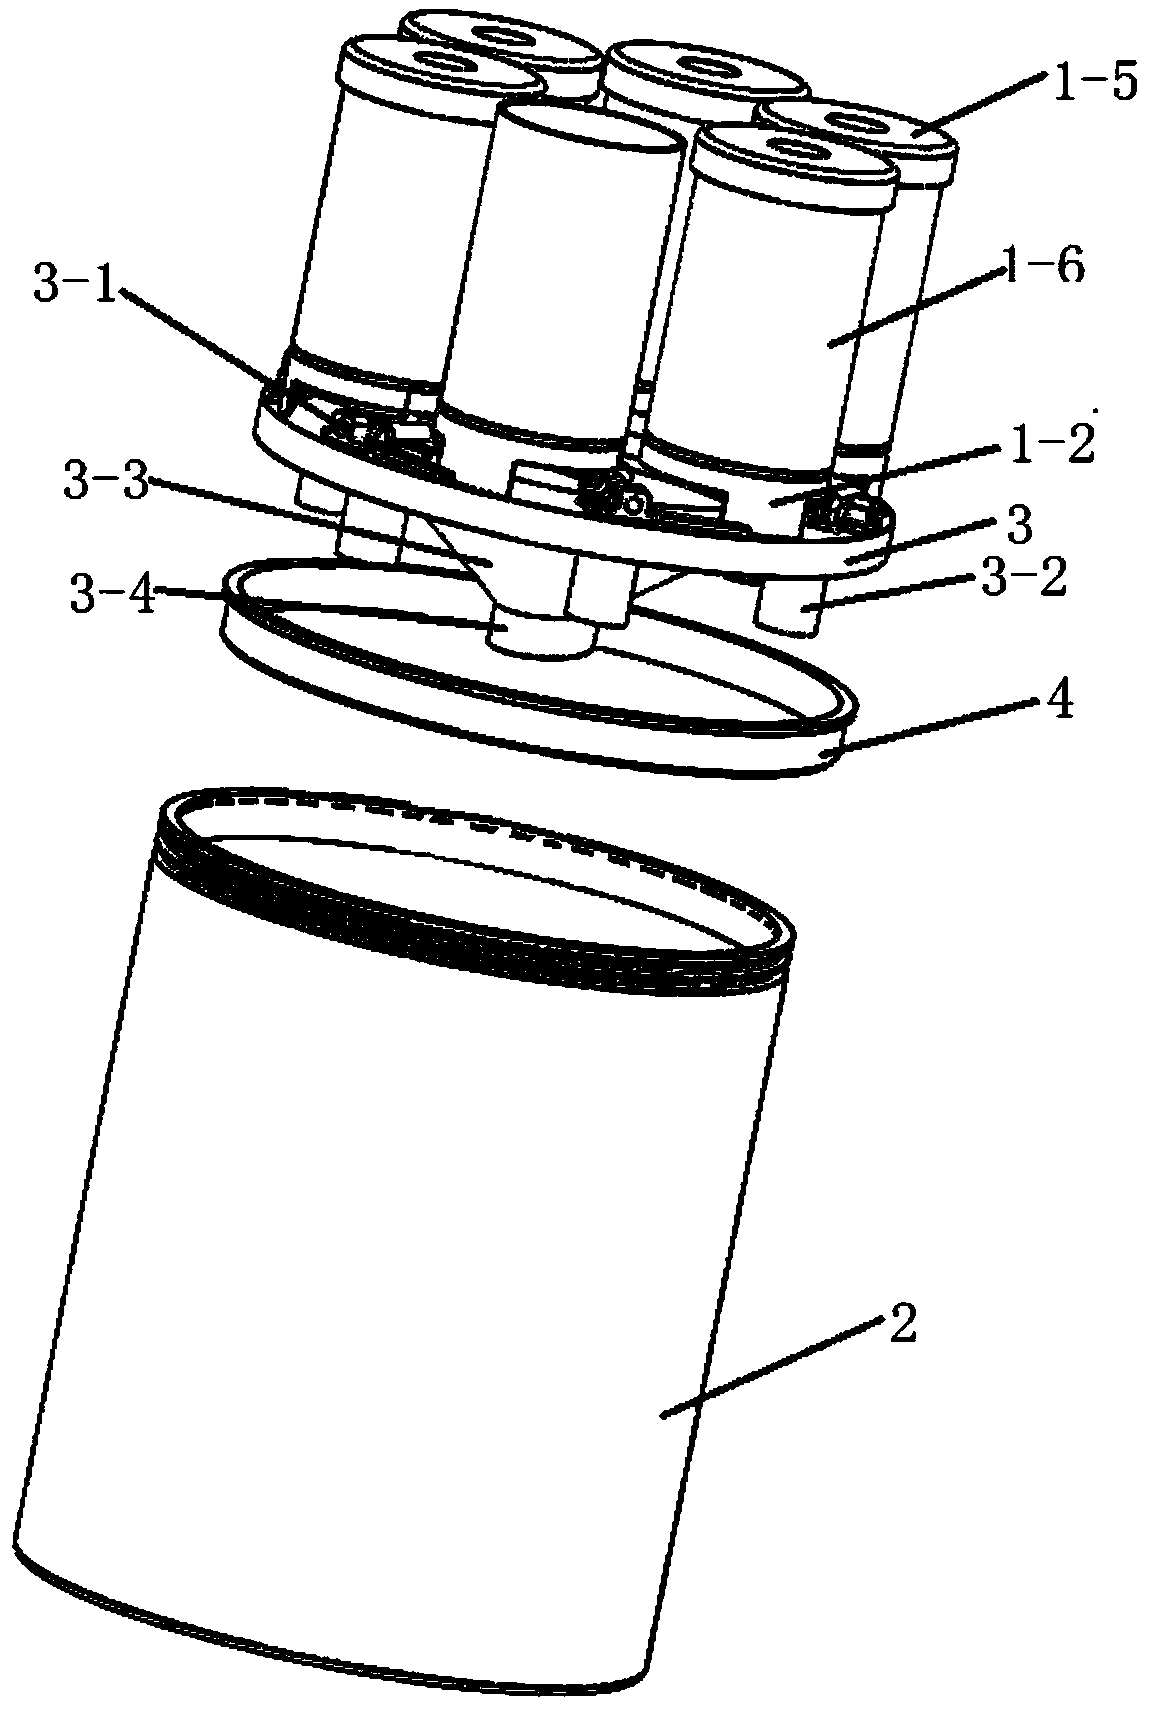 A cup-type drug dispensing device with a drug storage and dispensing function